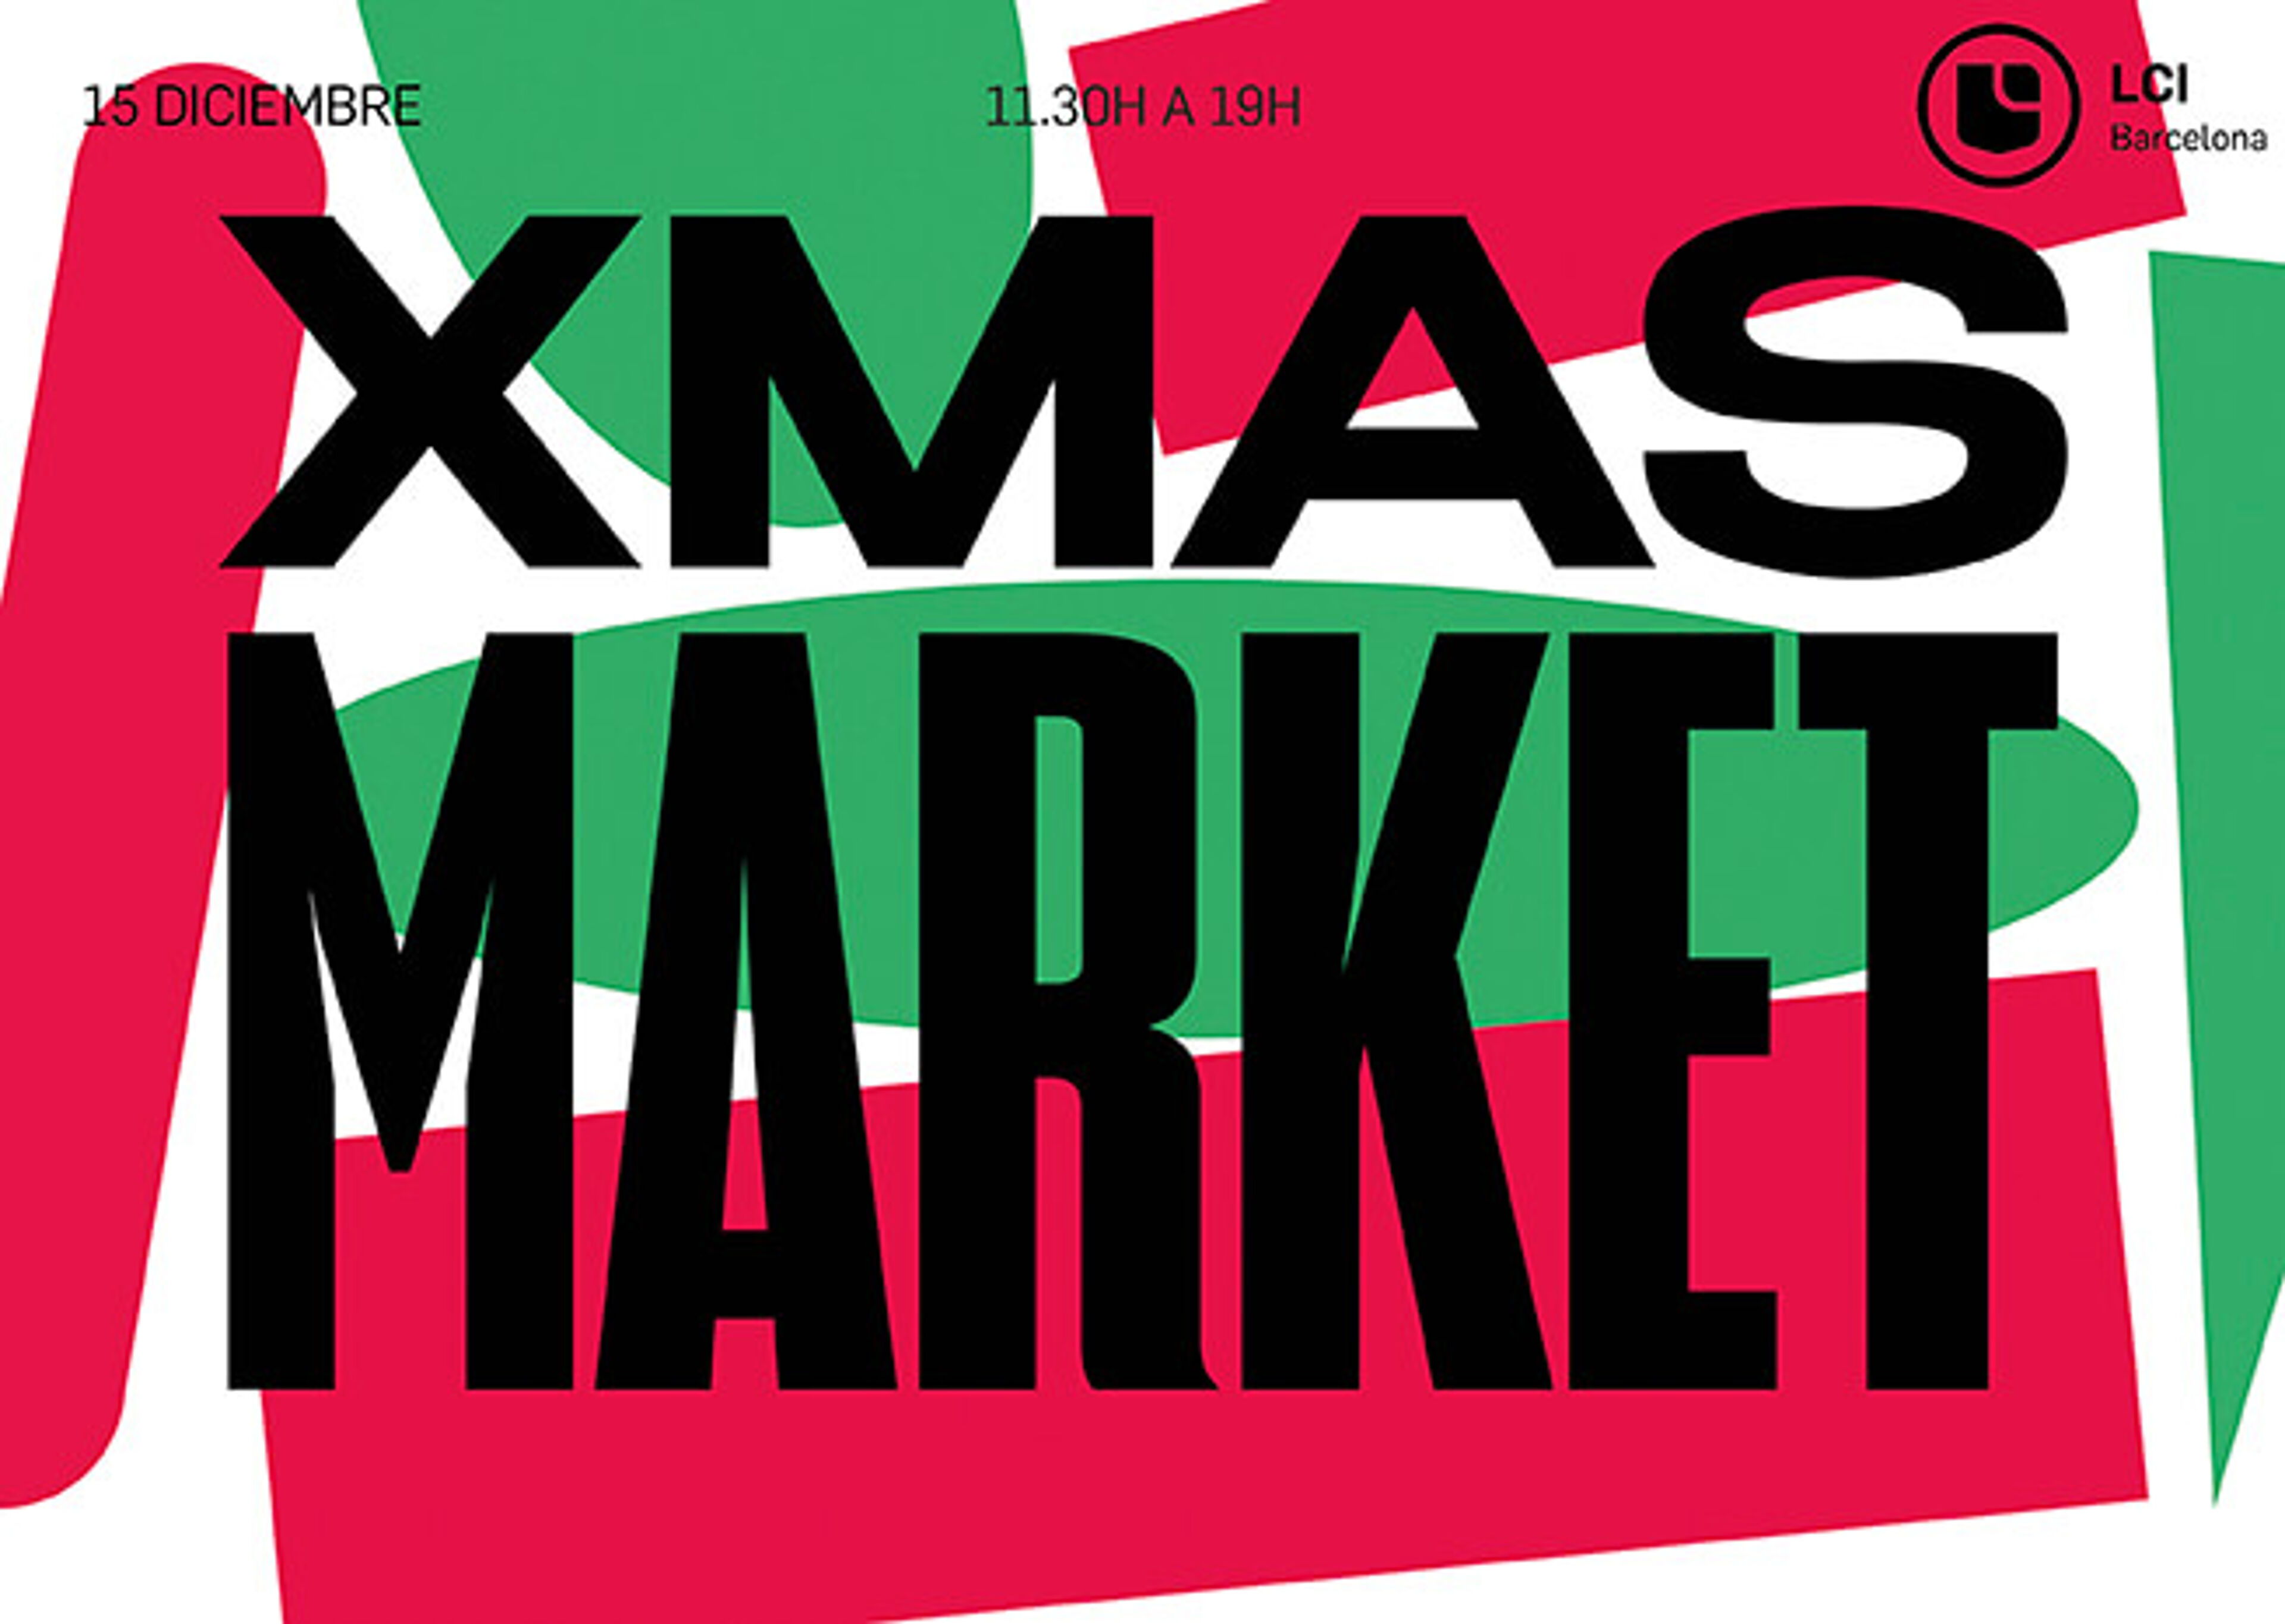 A bold, graphic poster with 'XMAS MARKET' in staggered red and green block letters, announcing an event on December 15 from 11.30h to 19h at LCI Barcelona.